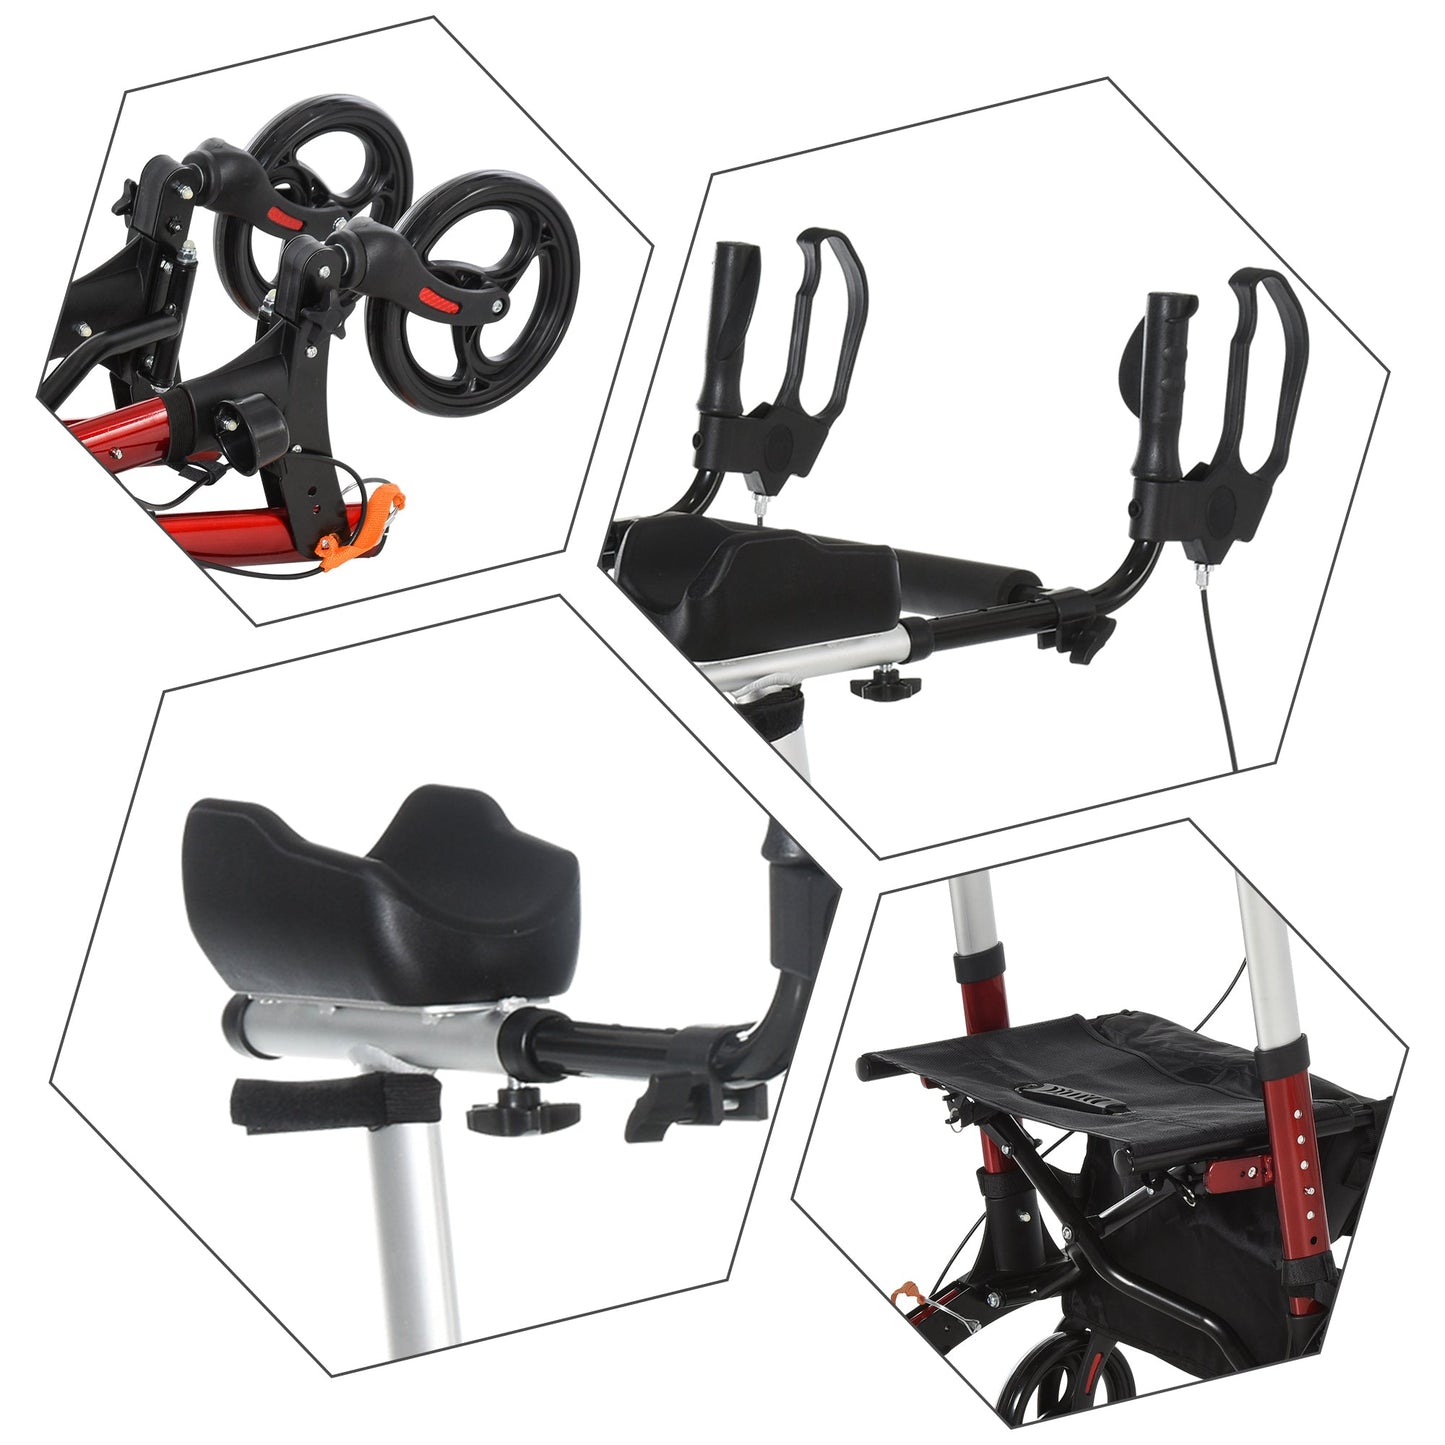 Folding Upright Rollator Walker Lightweight, Height Adjustment with Armrest, 1 Hand Folding Design with Removable Storage Bag, Crutch Holder Stand Up Walking Aid at Gallery Canada